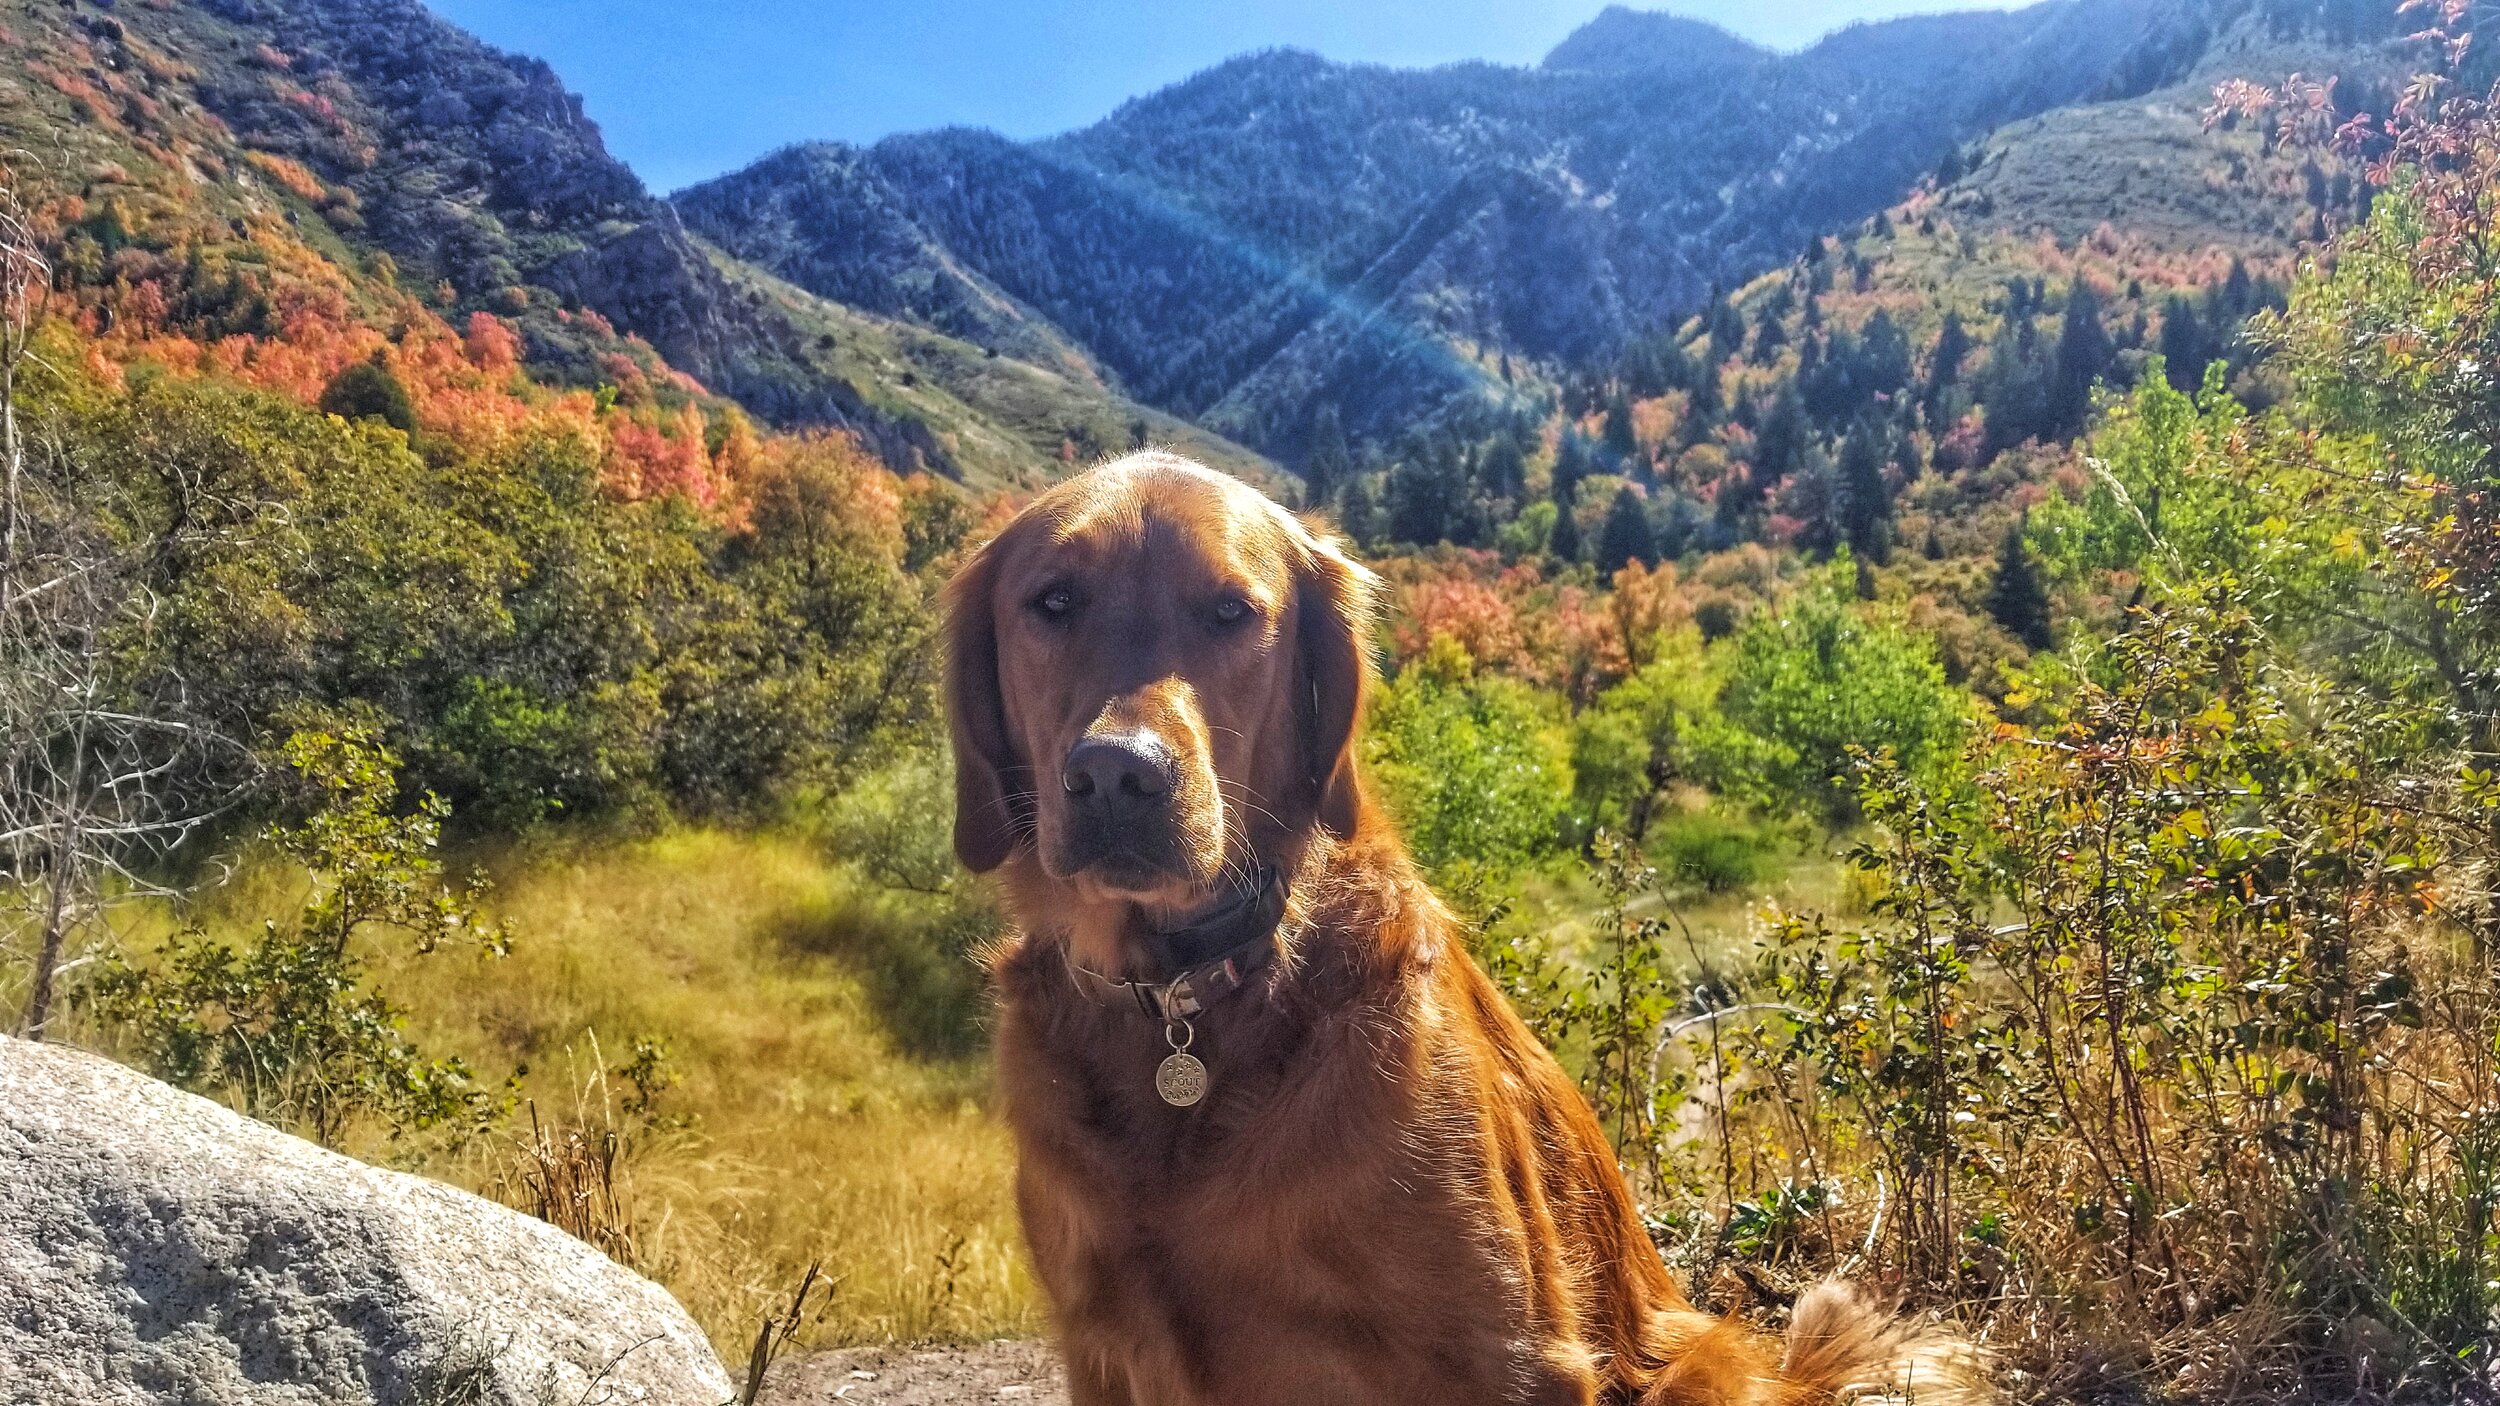 A golden retriever sits in front of a mountain canyon during the fall